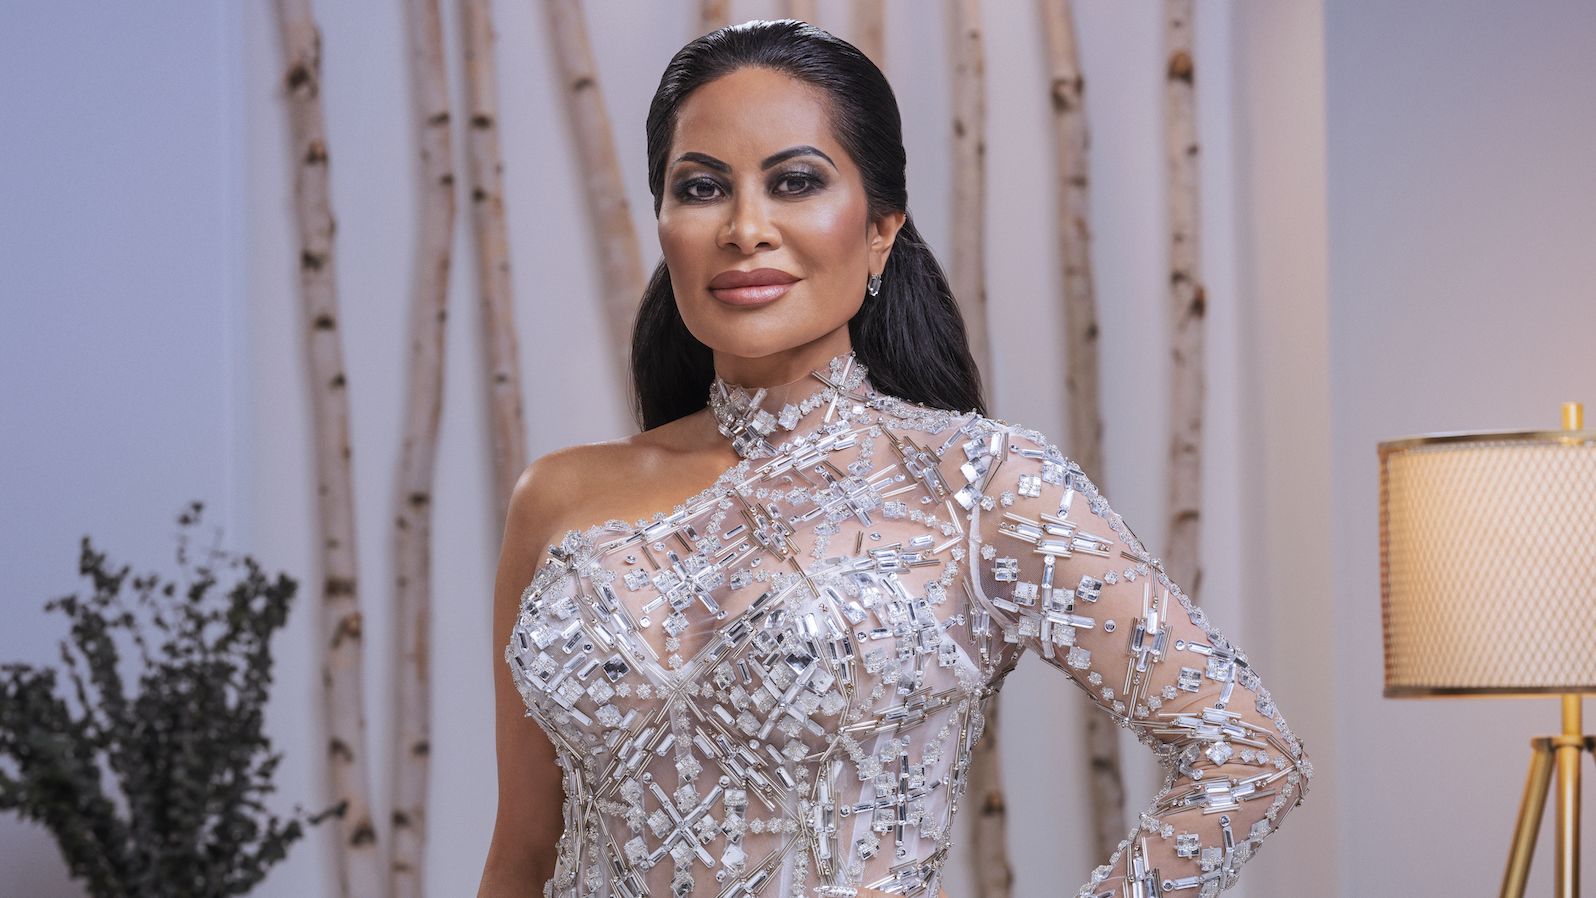 Jen Shah, a polarizing member of the "Real Housewives" franchise, pleaded guilty in July to one count of conspiracy to commit wire fraud.